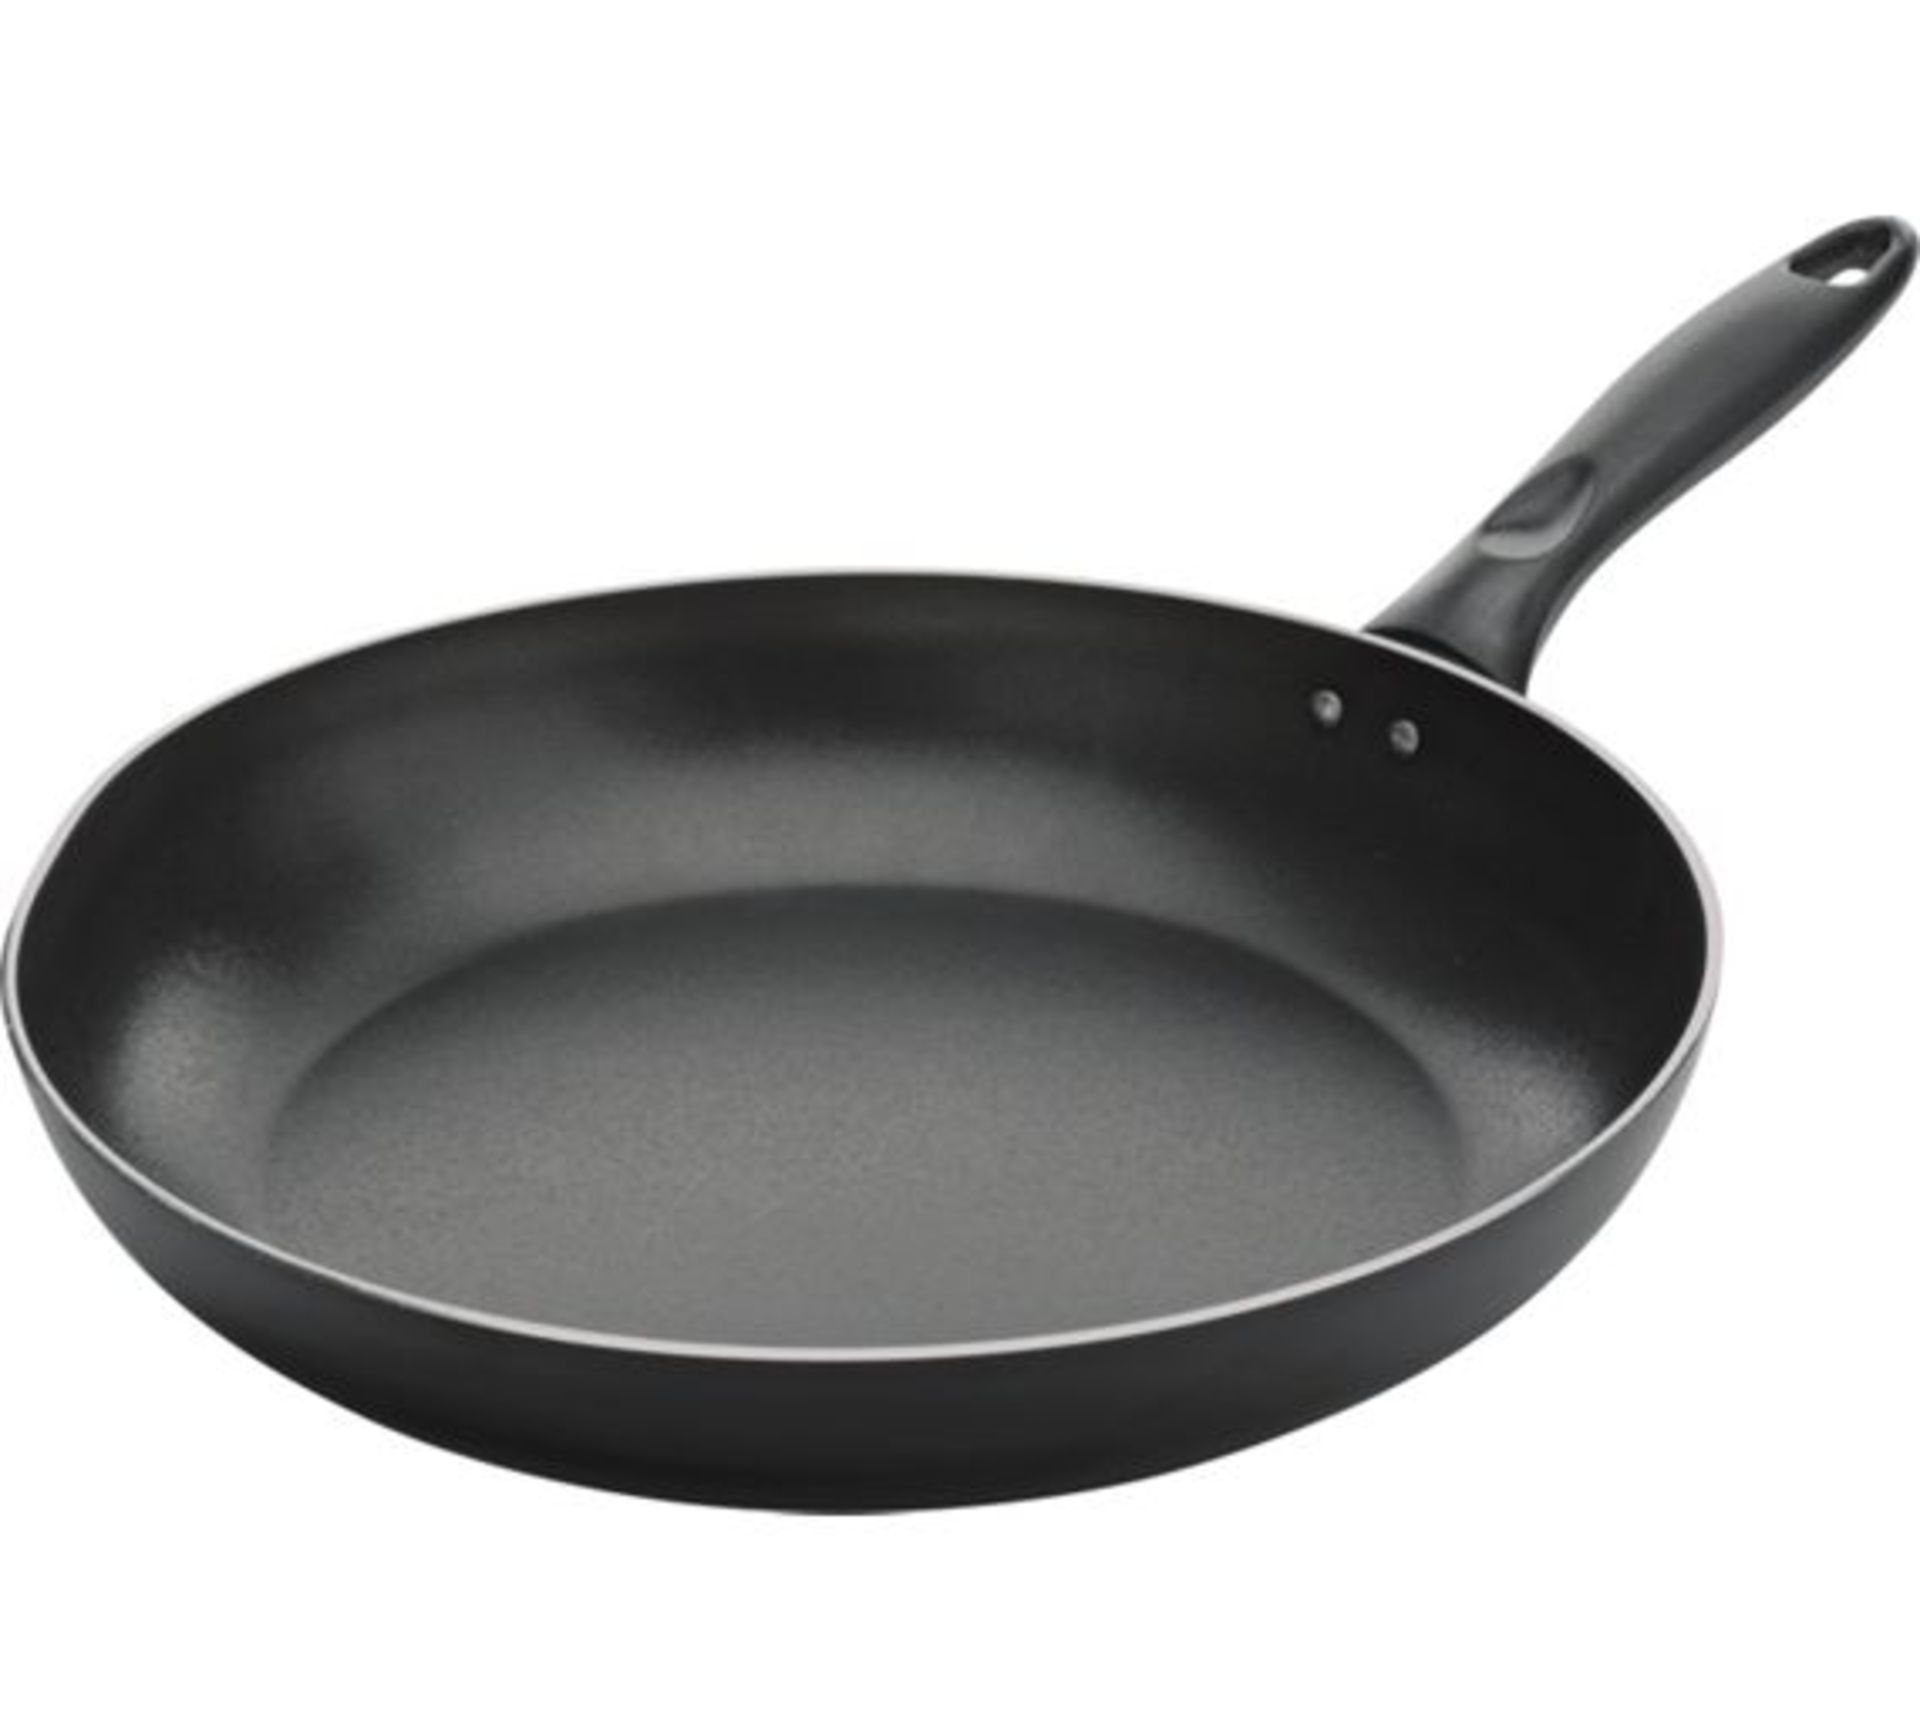 V Brand New 20cm Aluminium Non-Stick Teflon Coated Saute Pan With Stainless Steel and Stay Cool